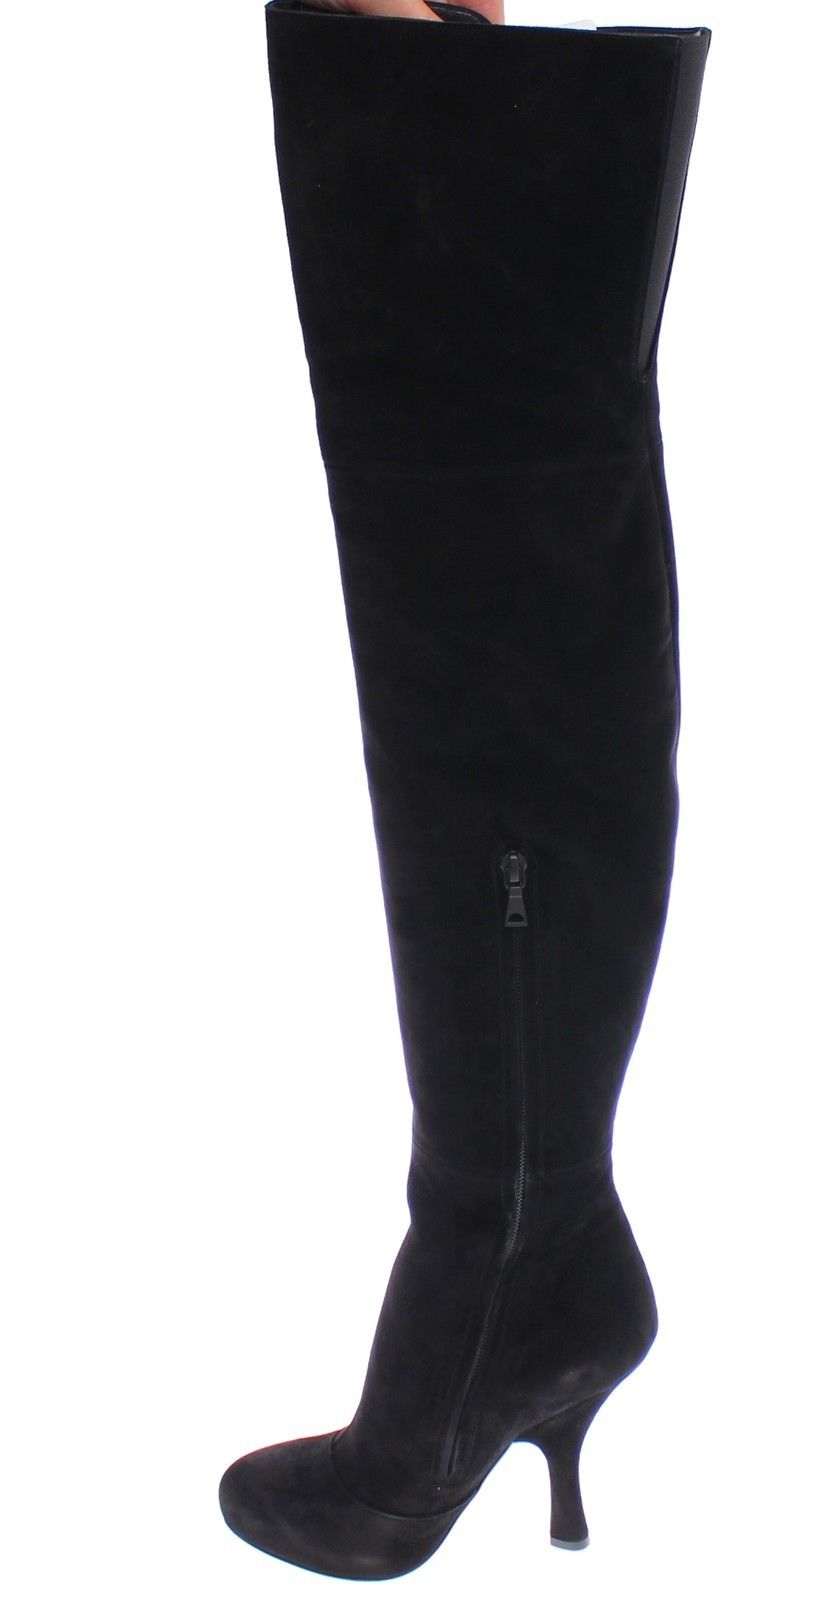 Black Suede Leather Over Knee Boots